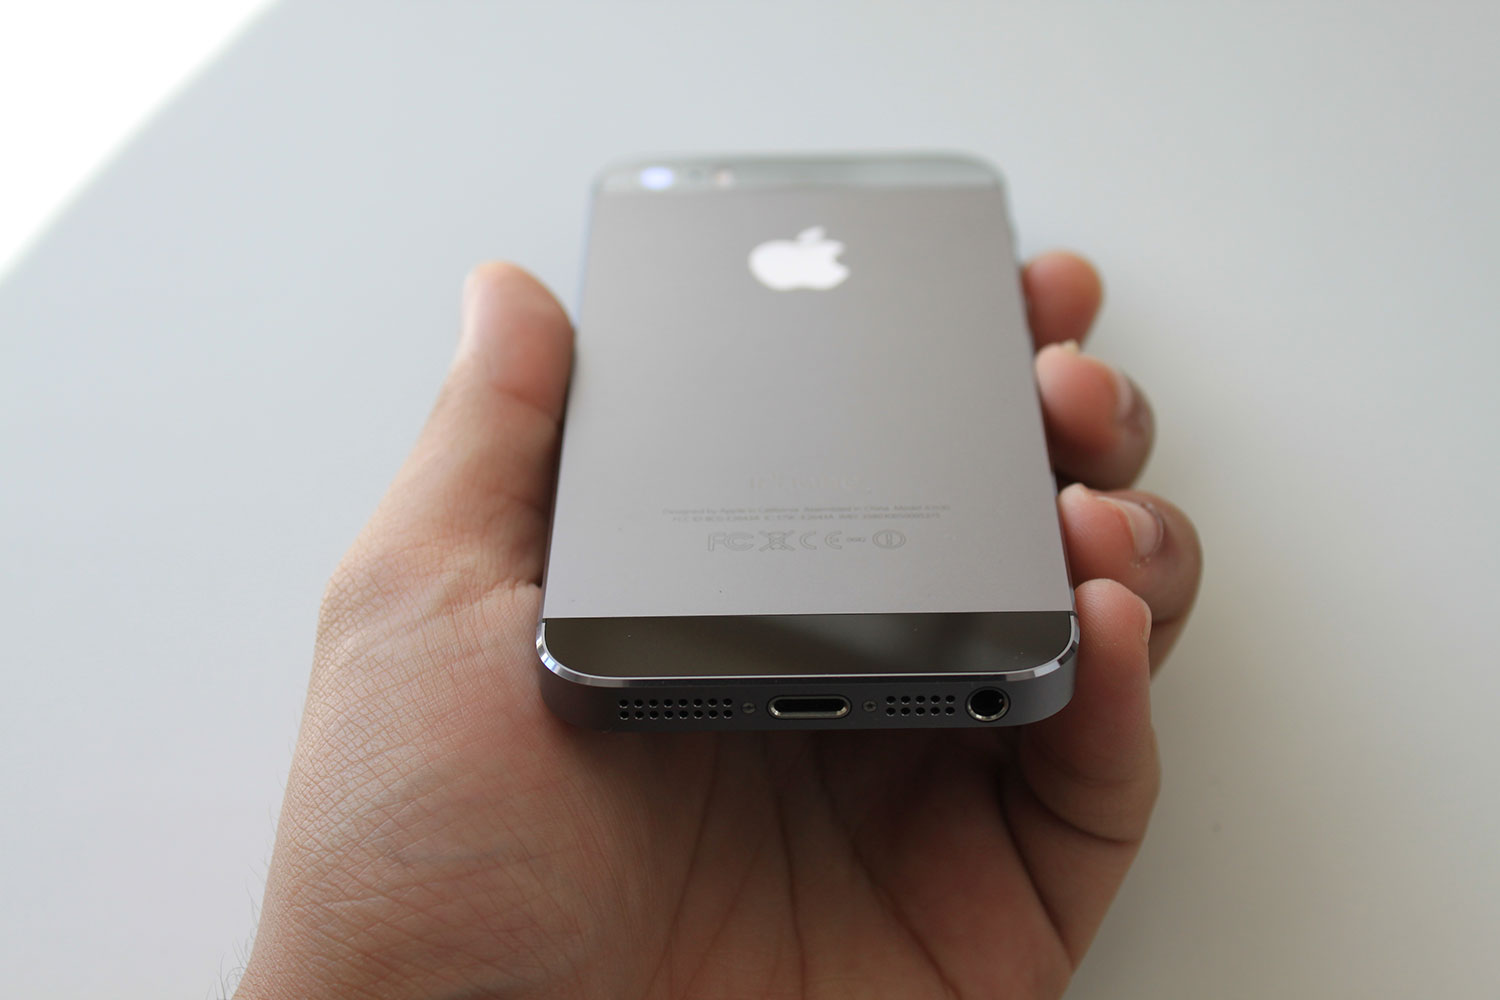 Iphone 5s Space grey, Silver and Gold